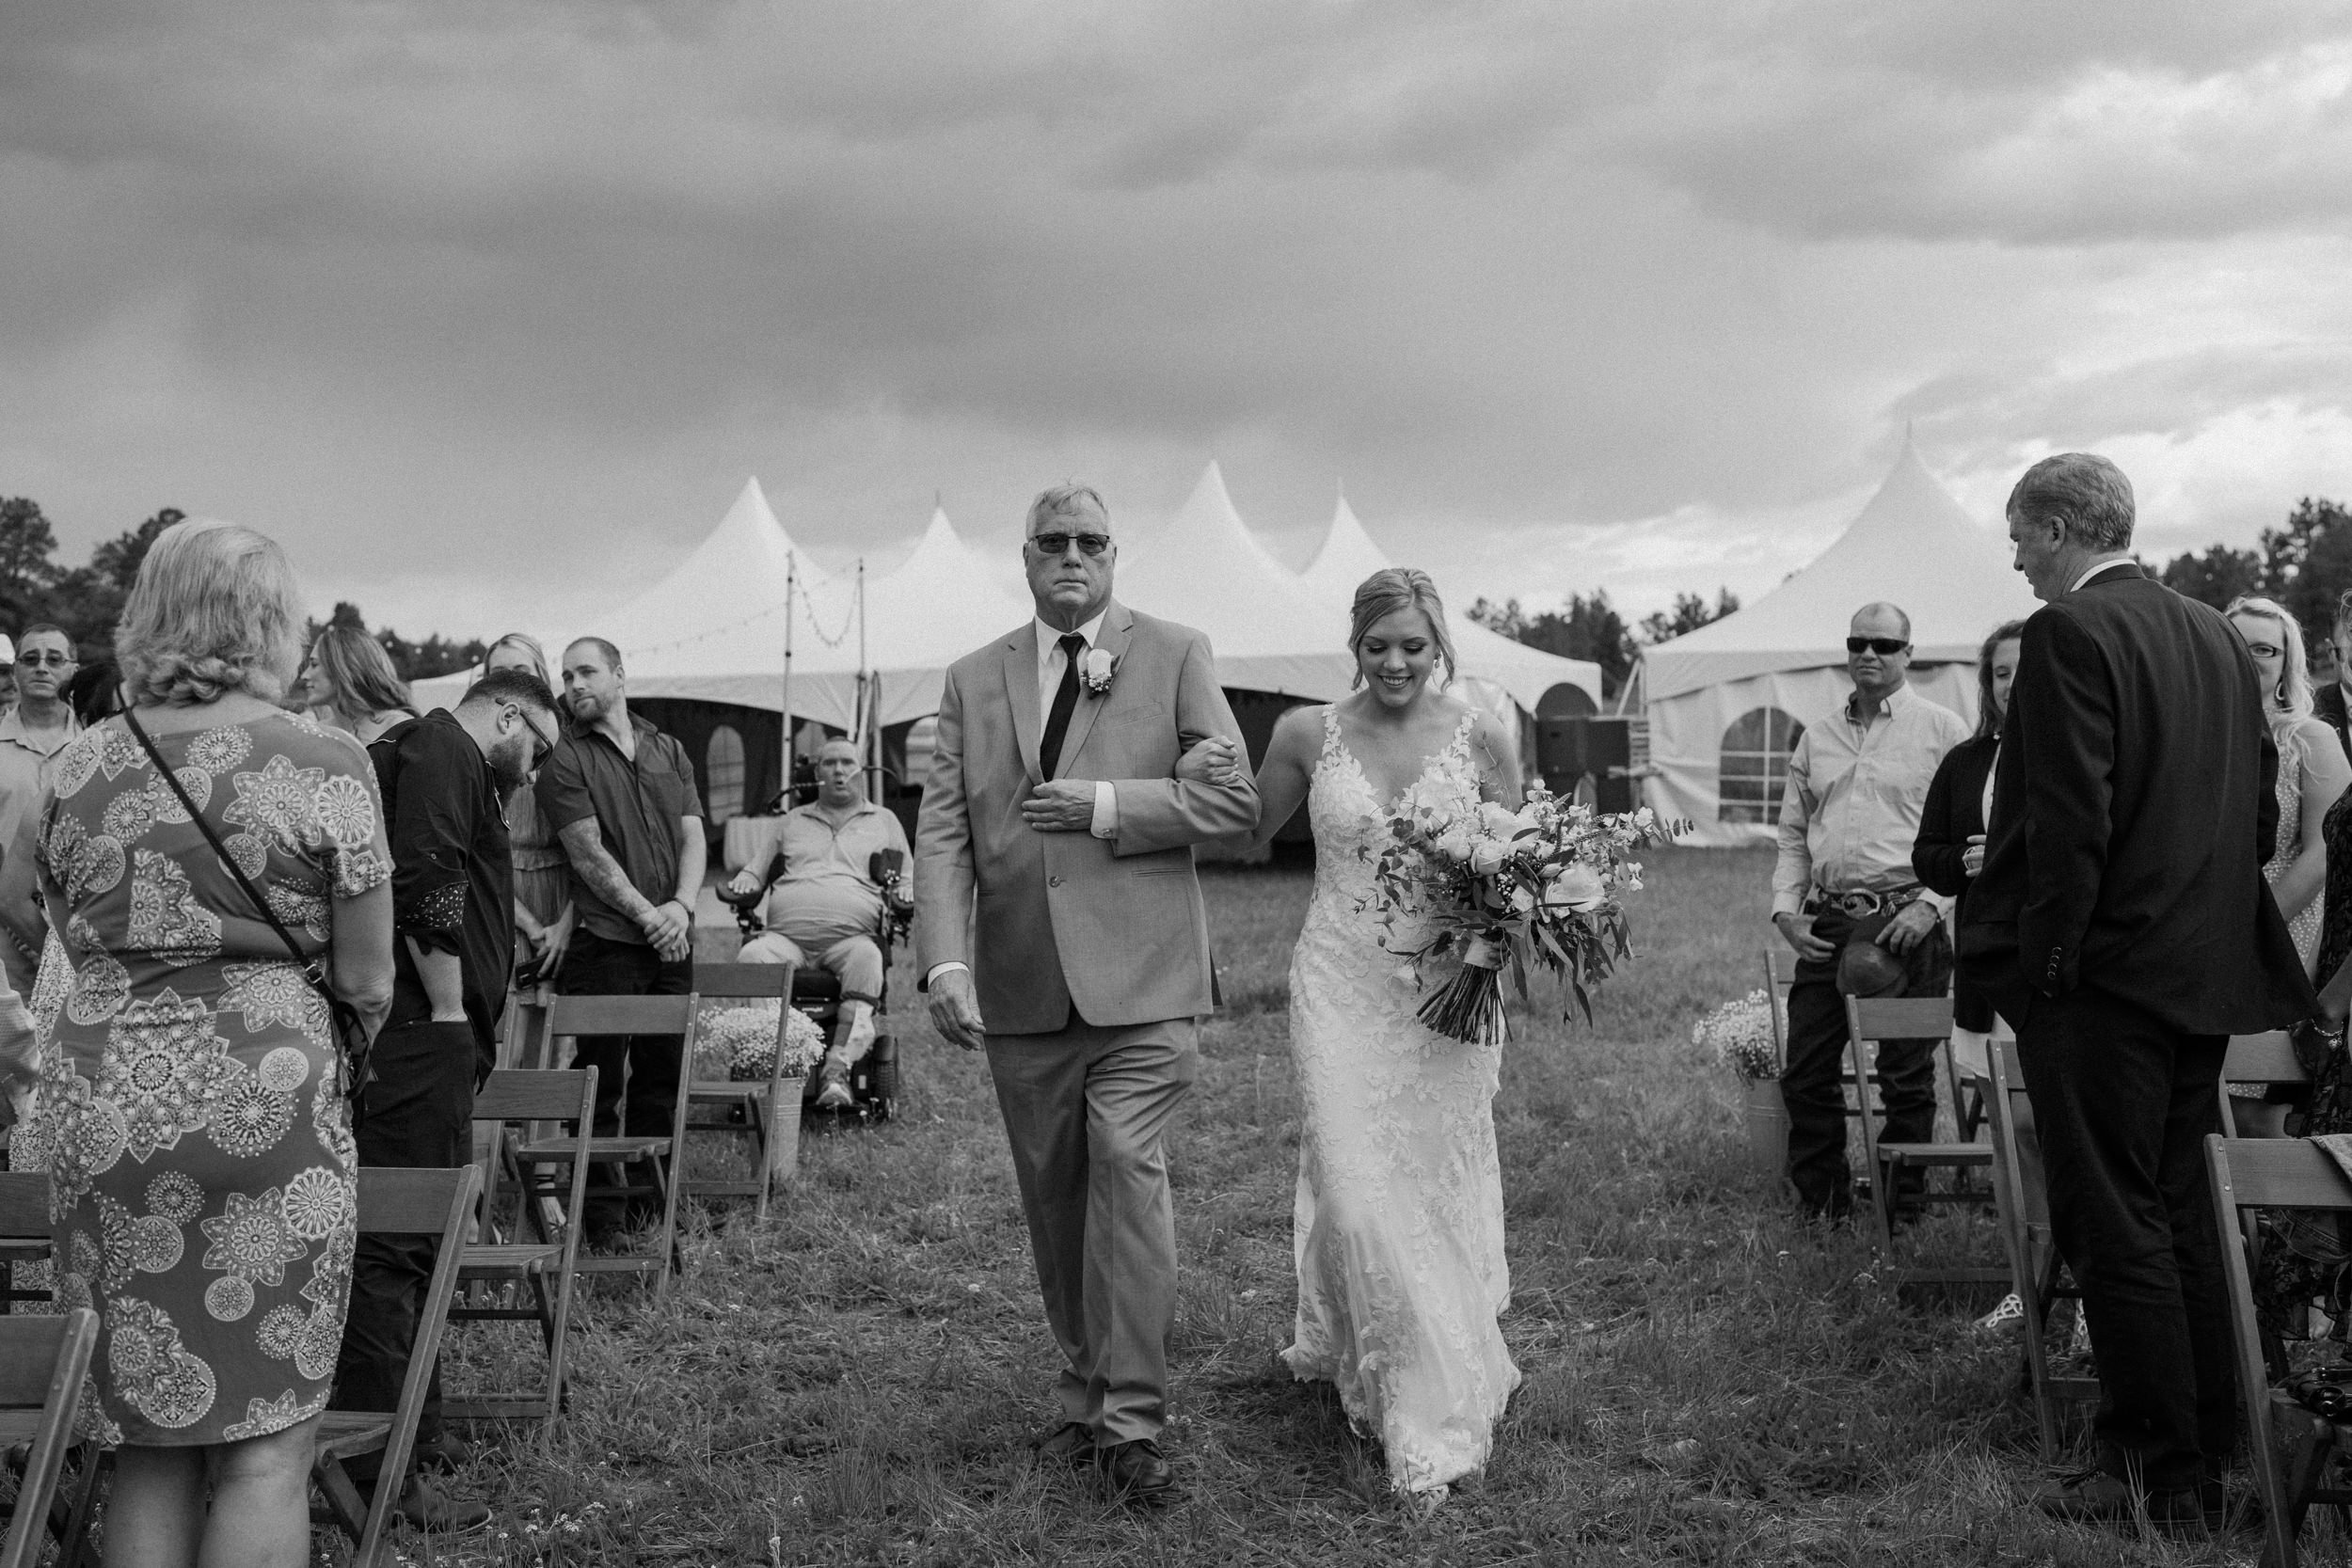 Bride and her father walk down the aisle together